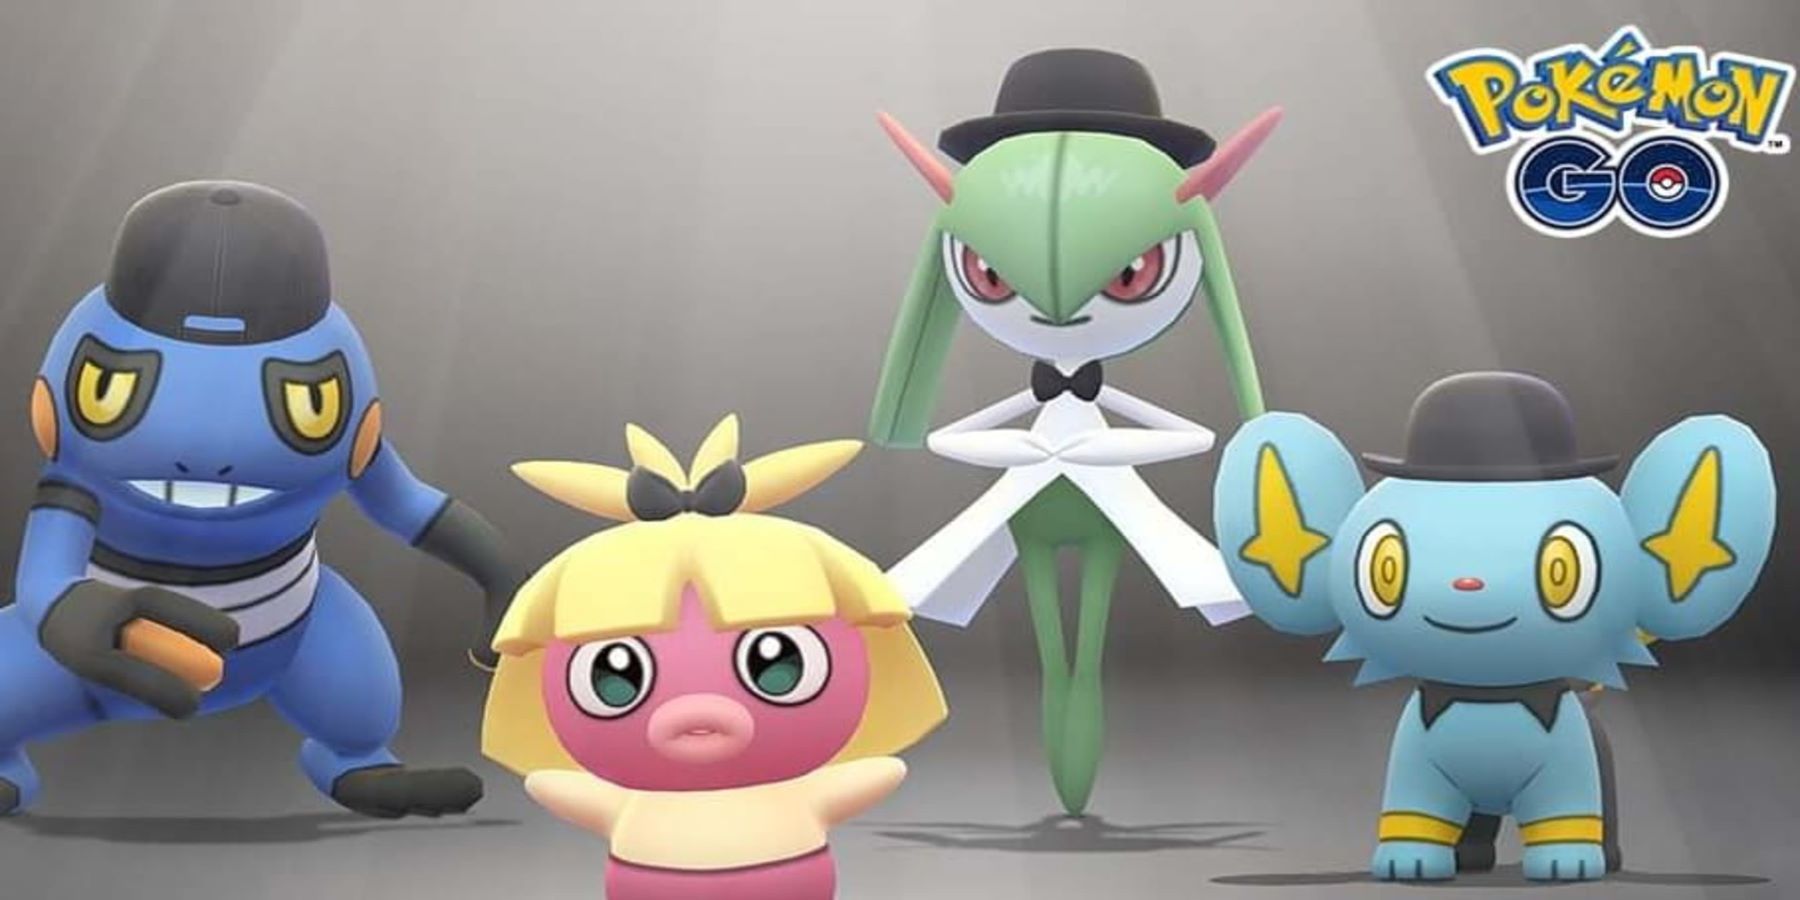 Promotional art for Pokemon GO's Fashion Week depicting Croagunk, Smoochum, Kirlia, and Shinx in event outfits